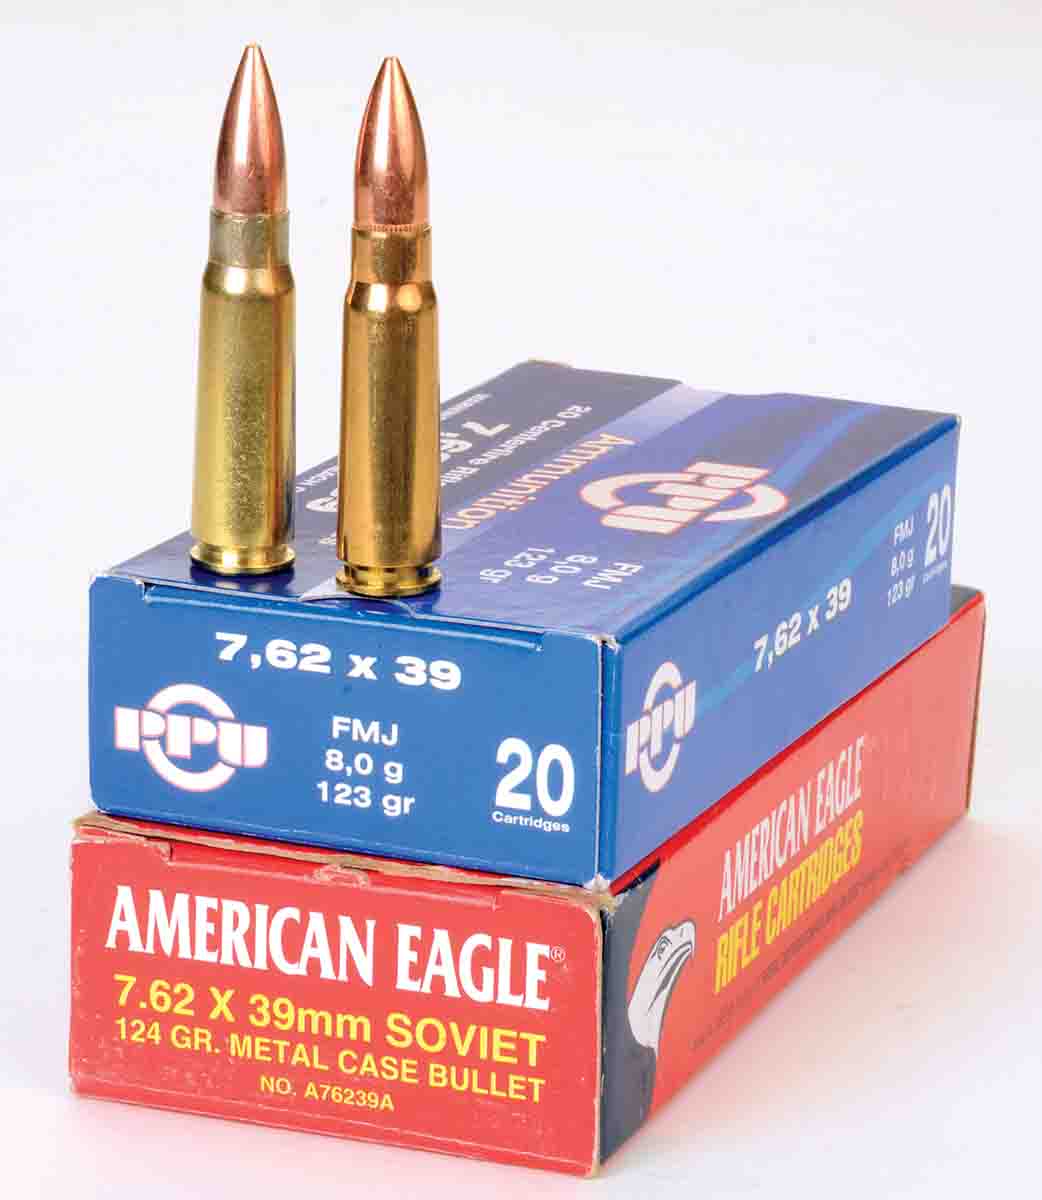 These two factory loads – one domestic and one foreign – were used to establish velocity standards for 7.62x39mm handloads.